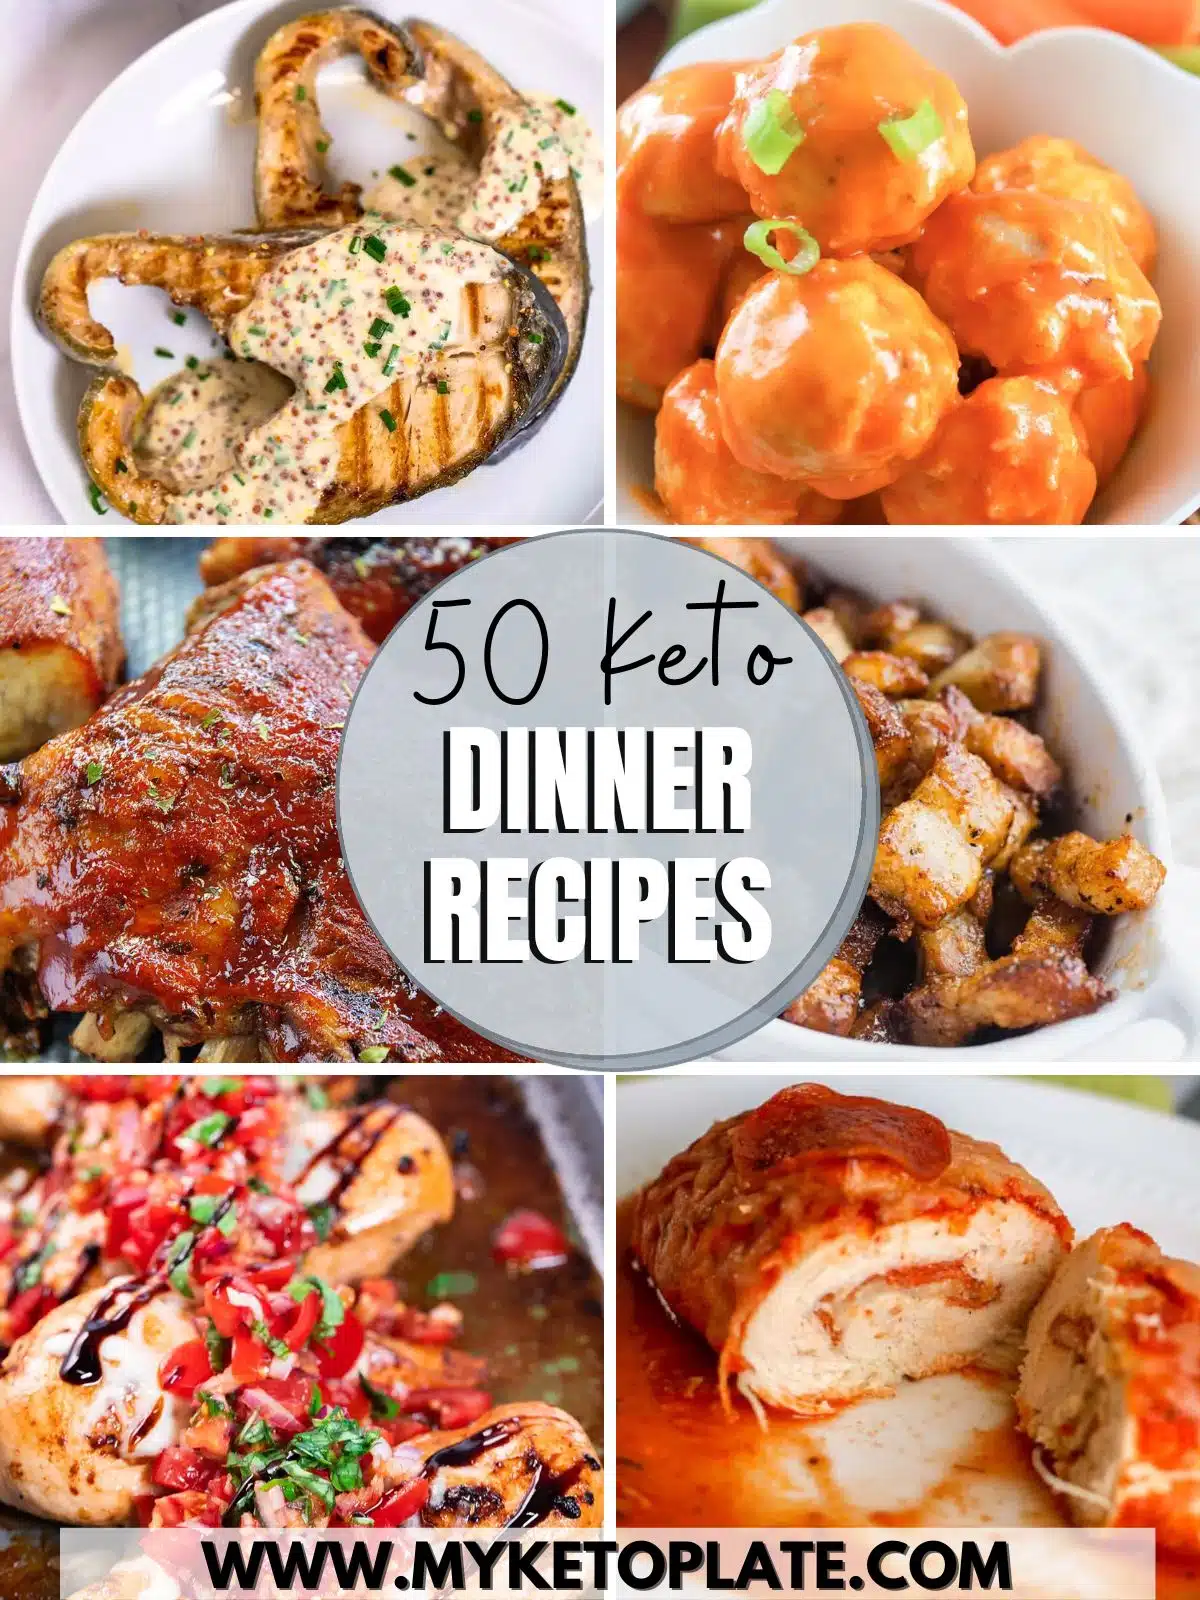 50 Keto Dinner Recipes - Best Low Carb Dinners 5